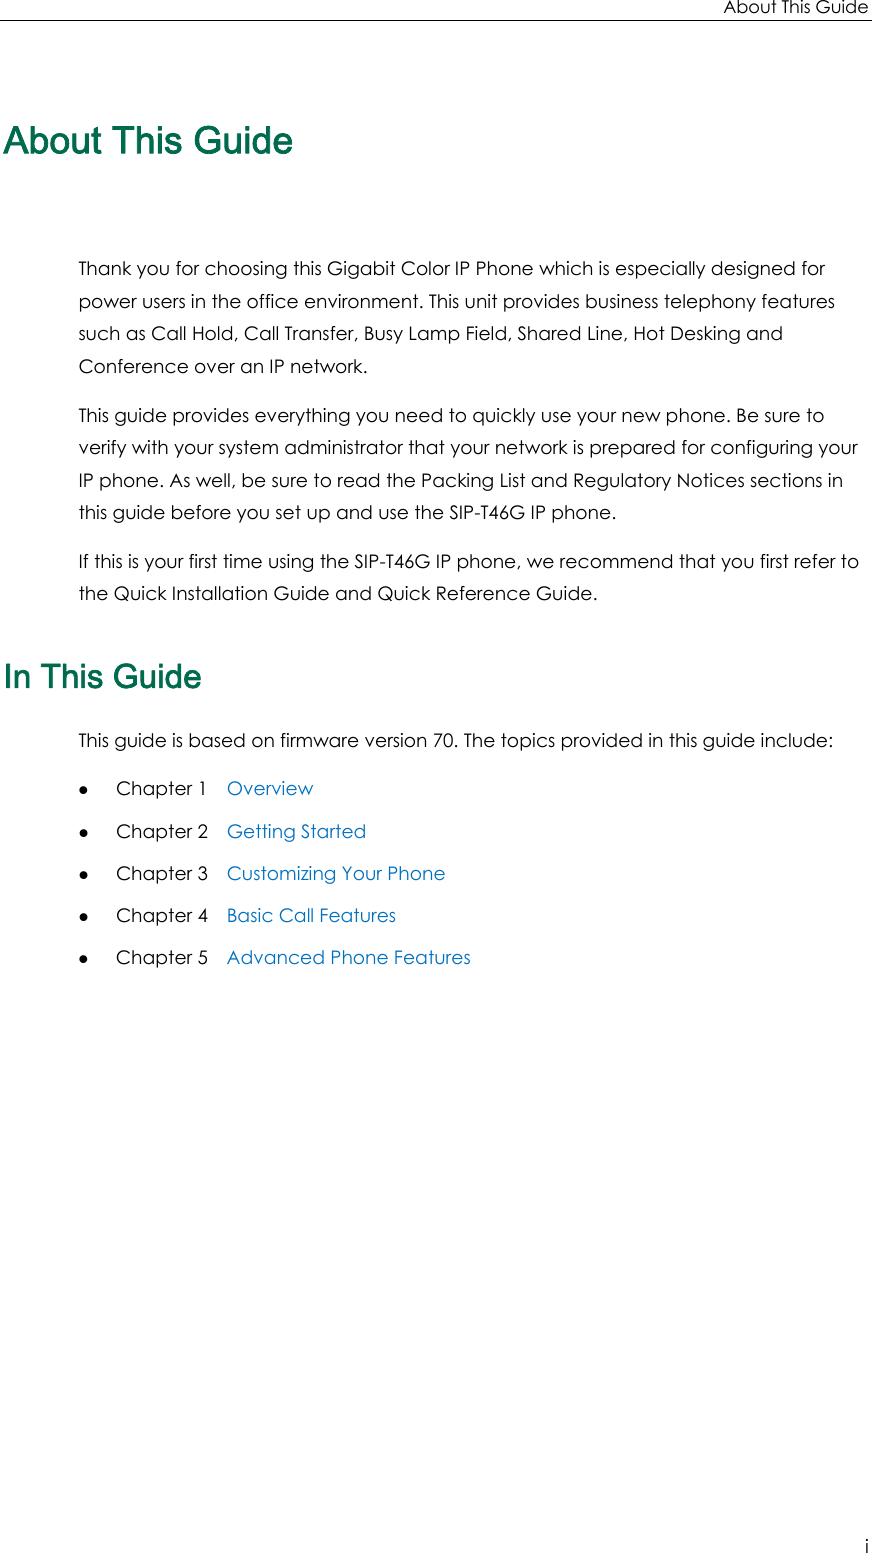 About This Guide i About This Guide Thank you for choosing this Gigabit Color IP Phone which is especially designed for power users in the office environment. This unit provides business telephony features such as Call Hold, Call Transfer, Busy Lamp Field, Shared Line, Hot Desking and Conference over an IP network. This guide provides everything you need to quickly use your new phone. Be sure to verify with your system administrator that your network is prepared for configuring your IP phone. As well, be sure to read the Packing List and Regulatory Notices sections in this guide before you set up and use the SIP-T46G IP phone. If this is your first time using the SIP-T46G IP phone, we recommend that you first refer to the Quick Installation Guide and Quick Reference Guide.   In This Guide This guide is based on firmware version 70. The topics provided in this guide include: z Chapter 1    Overview z Chapter 2    Getting Started z Chapter 3    Customizing Your Phone z Chapter 4    Basic Call Features z Chapter 5    Advanced Phone Features   